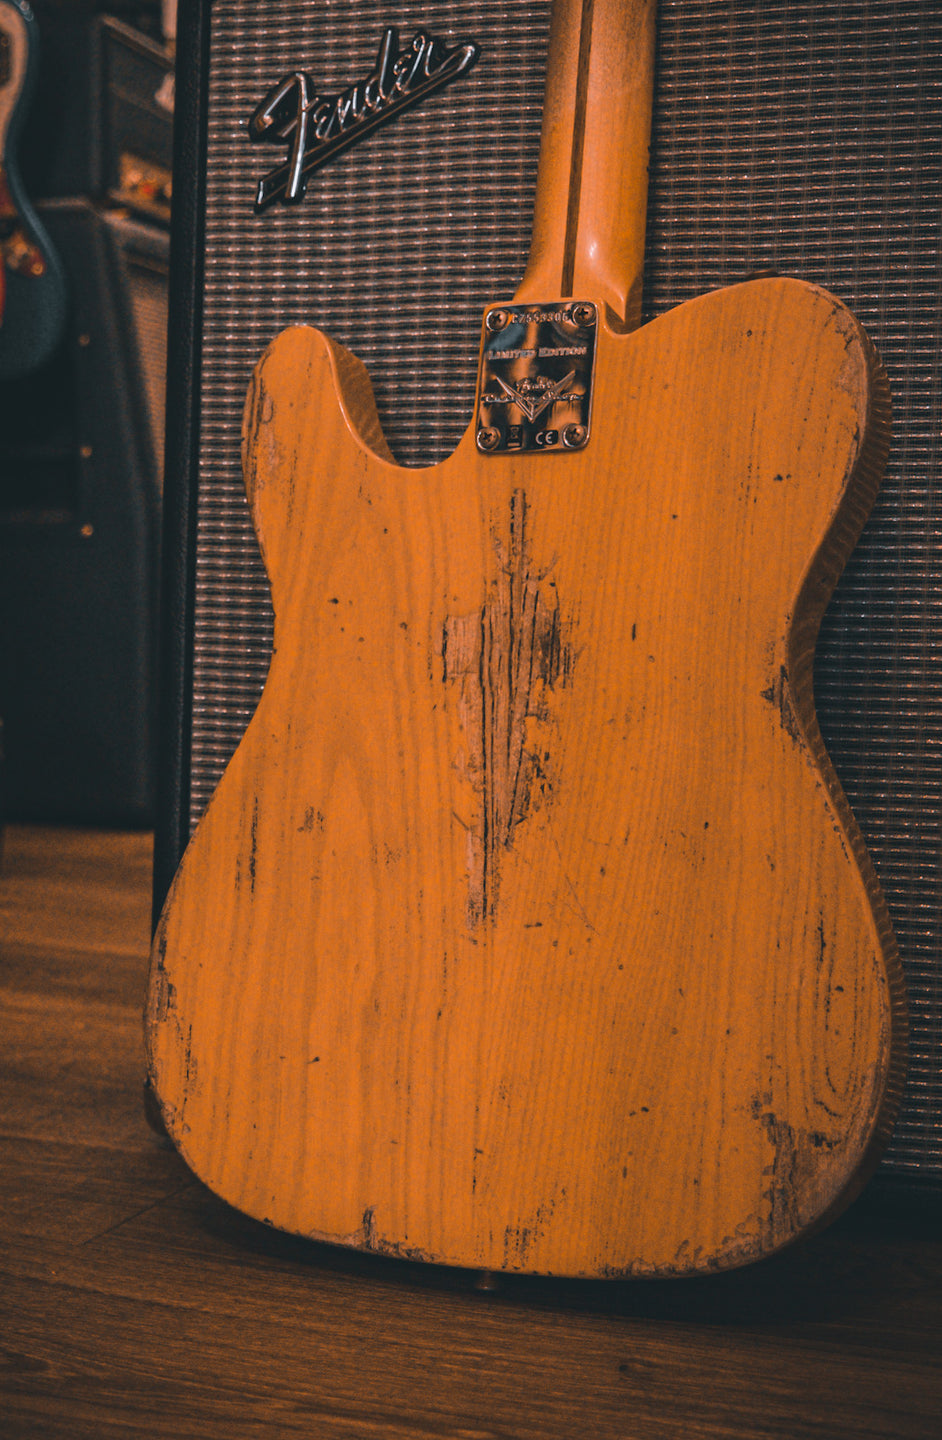 Fender Custom Shop Limited Edition CuNiFe Blackguard Telecaster Heavy Relic Aged Butterscotch Blonde